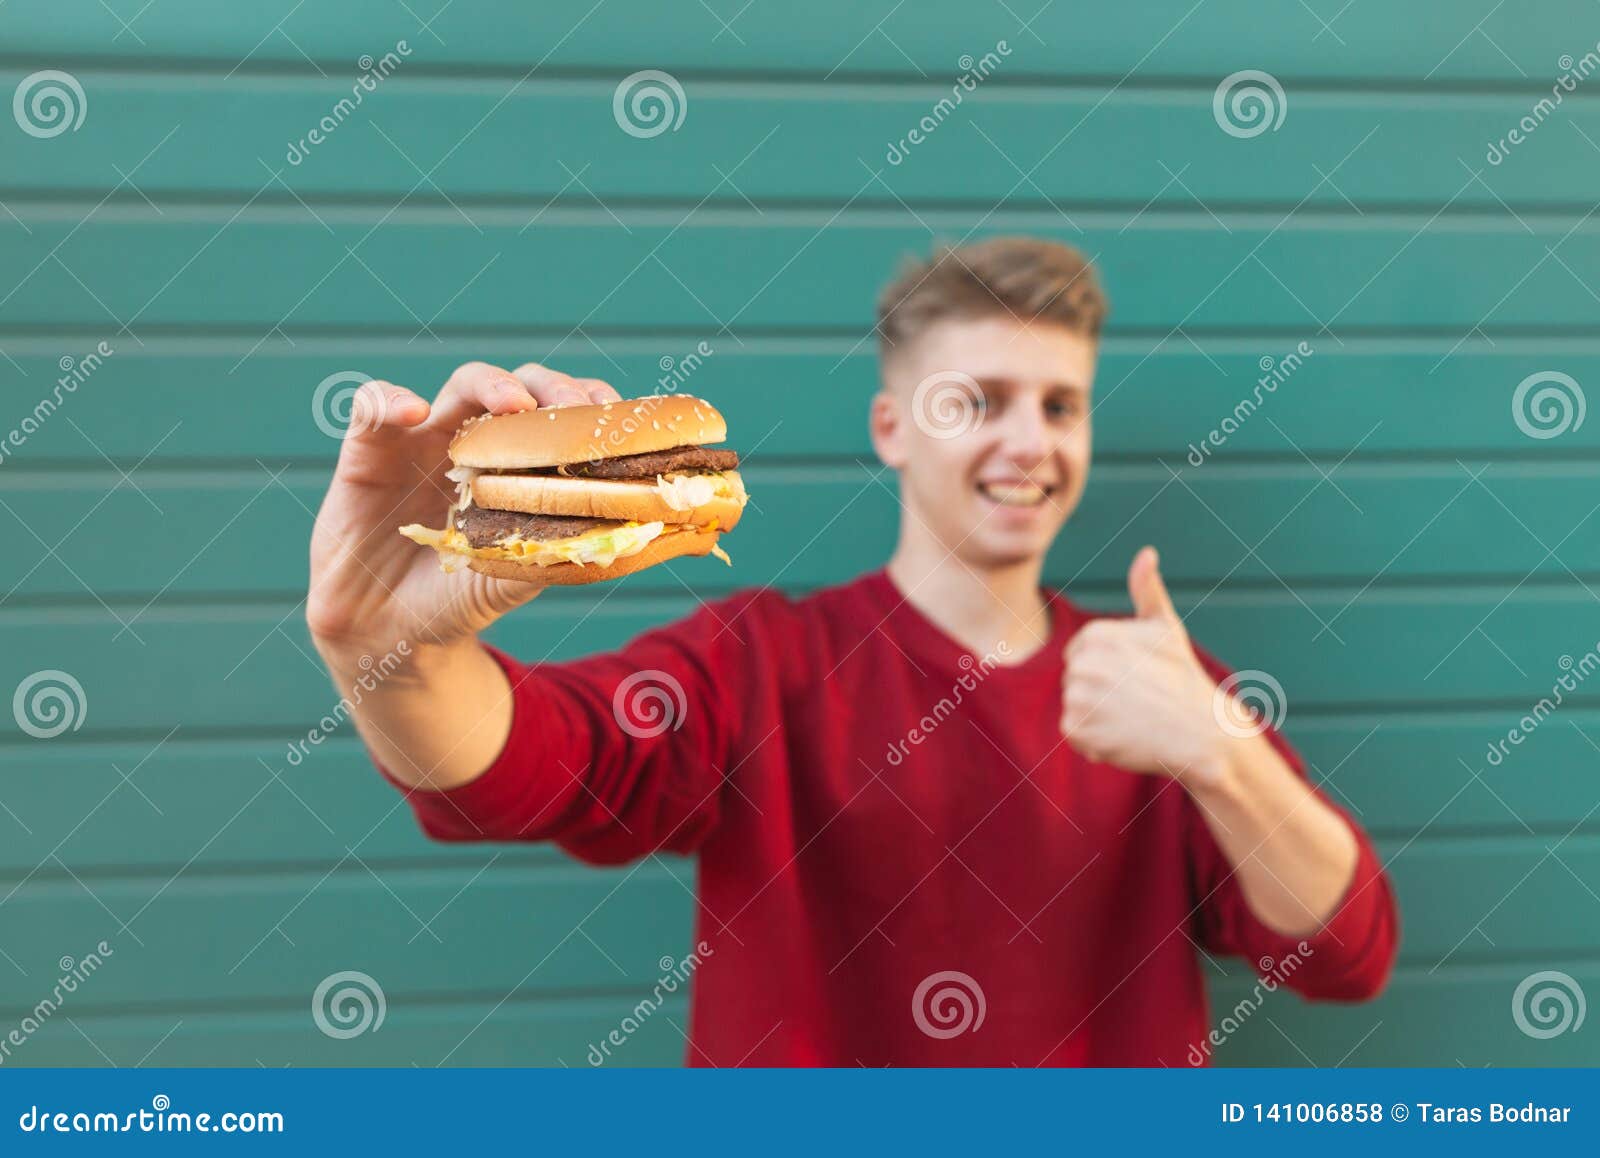 Smiling Man Holds An Appetizing Burger In His Hands And ...